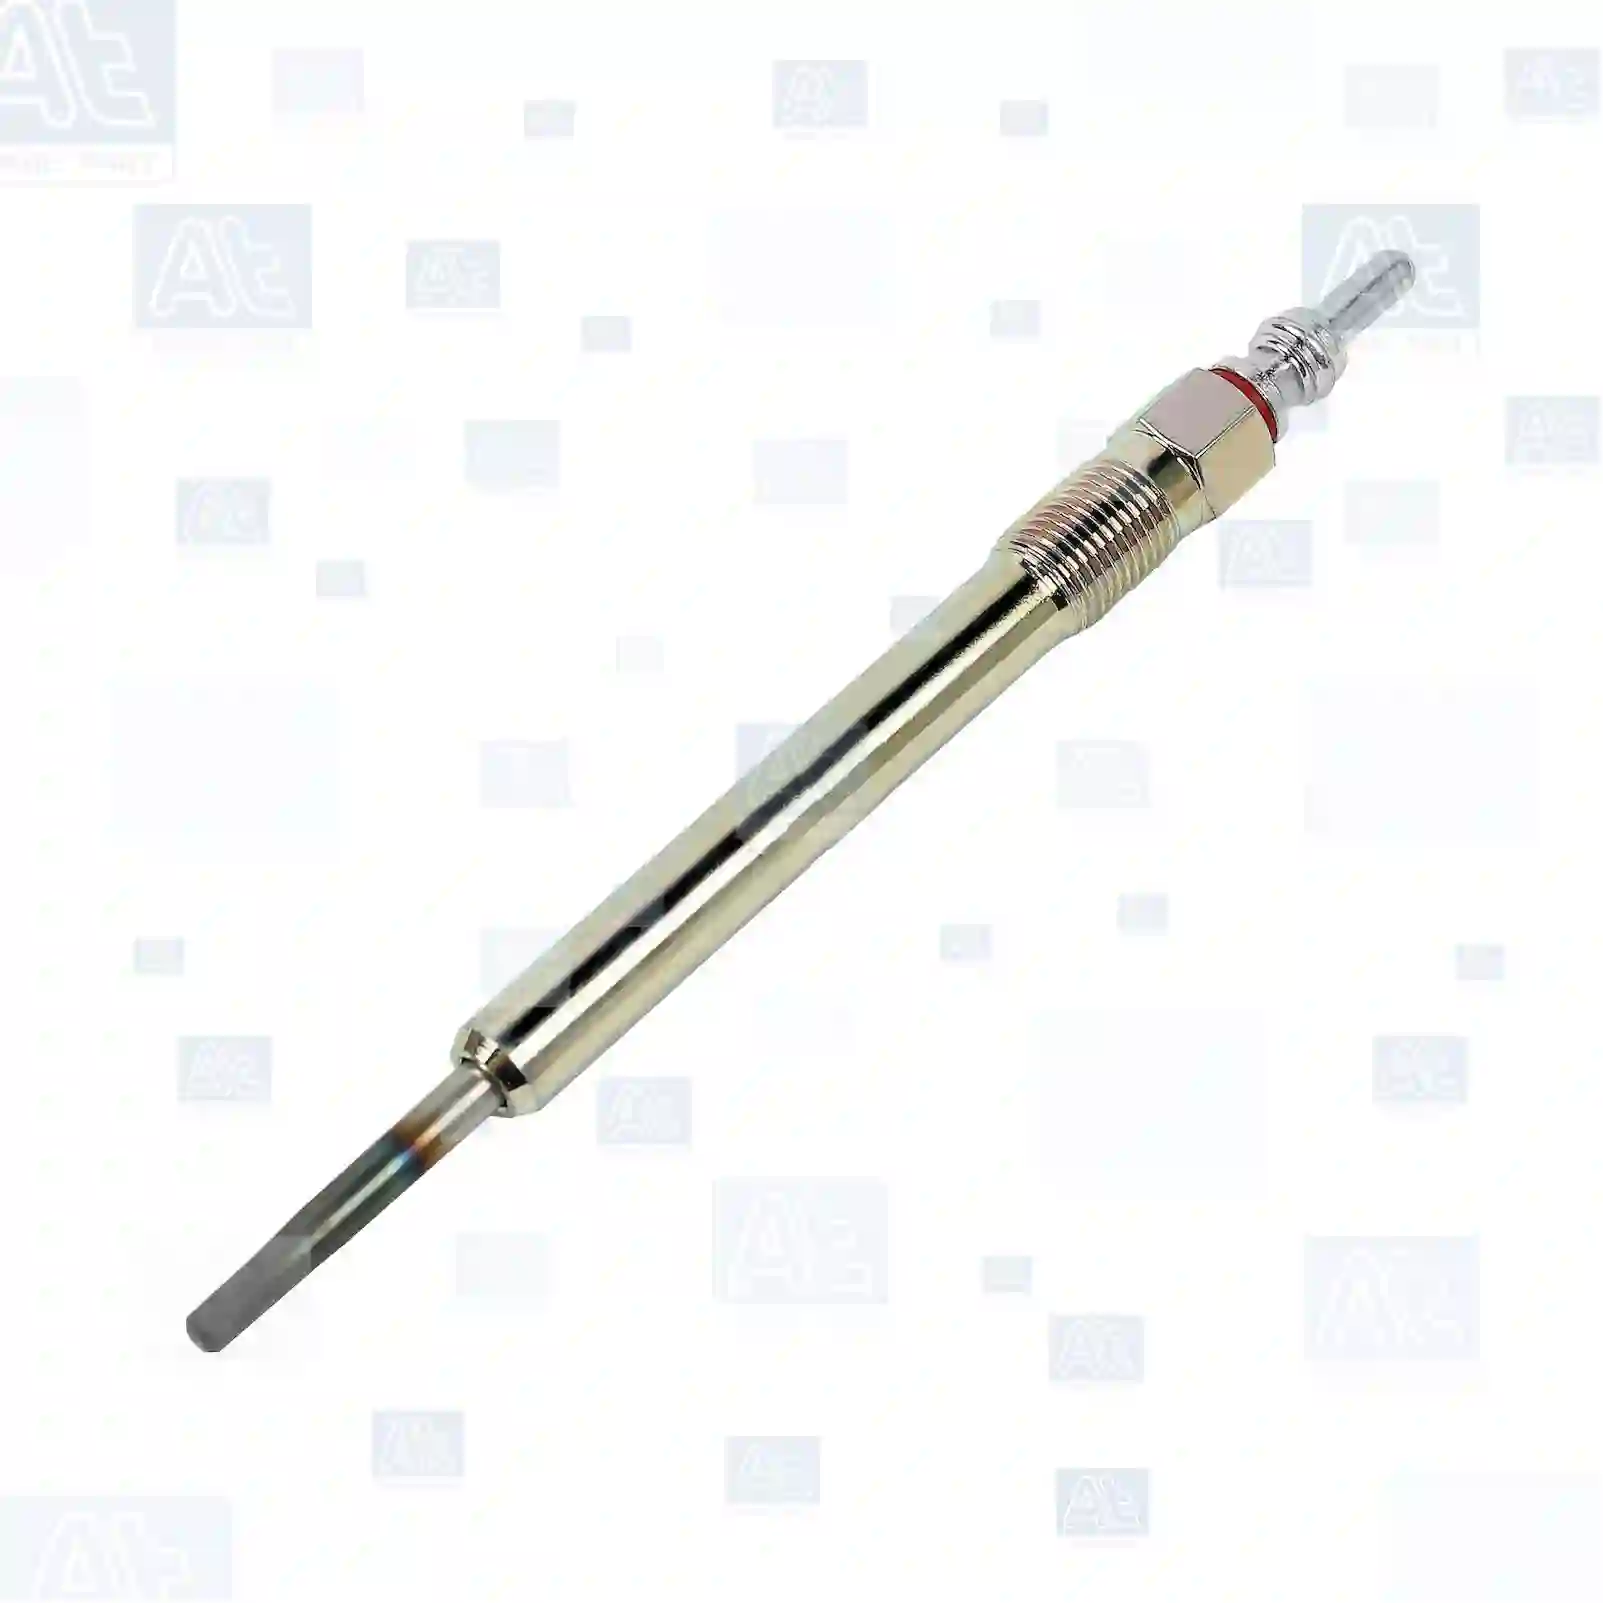 Glow plug, 77703548, 03L963319, 03L963319A, 03L963319B, 03L963319C, 03L963319D, 059963319E, 059963319F, 059963319J, 059963319M, 059998319, 32017516, 65268030001, 65268030002, 32017516, 95517032090, 95817032090, 95817032091, 9A796331900, 03L963319, 03L963319A, 03L963319B, 03L963319C, 03L963319D, 059963319E, 059963319F, 059963319J, 059963319M, 03L963319, 03L963319A, 03L963319B, 03L963319C, 03L963319D, 059963319E, 059963319F, 059963319J, 059963319M, 03L963319, 03L963319A, 03L963319B, 03L963319C, 03L963319D, 059963319C, 059963319E, 059963319F, 059963319J, 059963319M, 059963319S, 059963319T, 059998319, ZG20445-0008 ||  77703548 At Spare Part | Engine, Accelerator Pedal, Camshaft, Connecting Rod, Crankcase, Crankshaft, Cylinder Head, Engine Suspension Mountings, Exhaust Manifold, Exhaust Gas Recirculation, Filter Kits, Flywheel Housing, General Overhaul Kits, Engine, Intake Manifold, Oil Cleaner, Oil Cooler, Oil Filter, Oil Pump, Oil Sump, Piston & Liner, Sensor & Switch, Timing Case, Turbocharger, Cooling System, Belt Tensioner, Coolant Filter, Coolant Pipe, Corrosion Prevention Agent, Drive, Expansion Tank, Fan, Intercooler, Monitors & Gauges, Radiator, Thermostat, V-Belt / Timing belt, Water Pump, Fuel System, Electronical Injector Unit, Feed Pump, Fuel Filter, cpl., Fuel Gauge Sender,  Fuel Line, Fuel Pump, Fuel Tank, Injection Line Kit, Injection Pump, Exhaust System, Clutch & Pedal, Gearbox, Propeller Shaft, Axles, Brake System, Hubs & Wheels, Suspension, Leaf Spring, Universal Parts / Accessories, Steering, Electrical System, Cabin Glow plug, 77703548, 03L963319, 03L963319A, 03L963319B, 03L963319C, 03L963319D, 059963319E, 059963319F, 059963319J, 059963319M, 059998319, 32017516, 65268030001, 65268030002, 32017516, 95517032090, 95817032090, 95817032091, 9A796331900, 03L963319, 03L963319A, 03L963319B, 03L963319C, 03L963319D, 059963319E, 059963319F, 059963319J, 059963319M, 03L963319, 03L963319A, 03L963319B, 03L963319C, 03L963319D, 059963319E, 059963319F, 059963319J, 059963319M, 03L963319, 03L963319A, 03L963319B, 03L963319C, 03L963319D, 059963319C, 059963319E, 059963319F, 059963319J, 059963319M, 059963319S, 059963319T, 059998319, ZG20445-0008 ||  77703548 At Spare Part | Engine, Accelerator Pedal, Camshaft, Connecting Rod, Crankcase, Crankshaft, Cylinder Head, Engine Suspension Mountings, Exhaust Manifold, Exhaust Gas Recirculation, Filter Kits, Flywheel Housing, General Overhaul Kits, Engine, Intake Manifold, Oil Cleaner, Oil Cooler, Oil Filter, Oil Pump, Oil Sump, Piston & Liner, Sensor & Switch, Timing Case, Turbocharger, Cooling System, Belt Tensioner, Coolant Filter, Coolant Pipe, Corrosion Prevention Agent, Drive, Expansion Tank, Fan, Intercooler, Monitors & Gauges, Radiator, Thermostat, V-Belt / Timing belt, Water Pump, Fuel System, Electronical Injector Unit, Feed Pump, Fuel Filter, cpl., Fuel Gauge Sender,  Fuel Line, Fuel Pump, Fuel Tank, Injection Line Kit, Injection Pump, Exhaust System, Clutch & Pedal, Gearbox, Propeller Shaft, Axles, Brake System, Hubs & Wheels, Suspension, Leaf Spring, Universal Parts / Accessories, Steering, Electrical System, Cabin